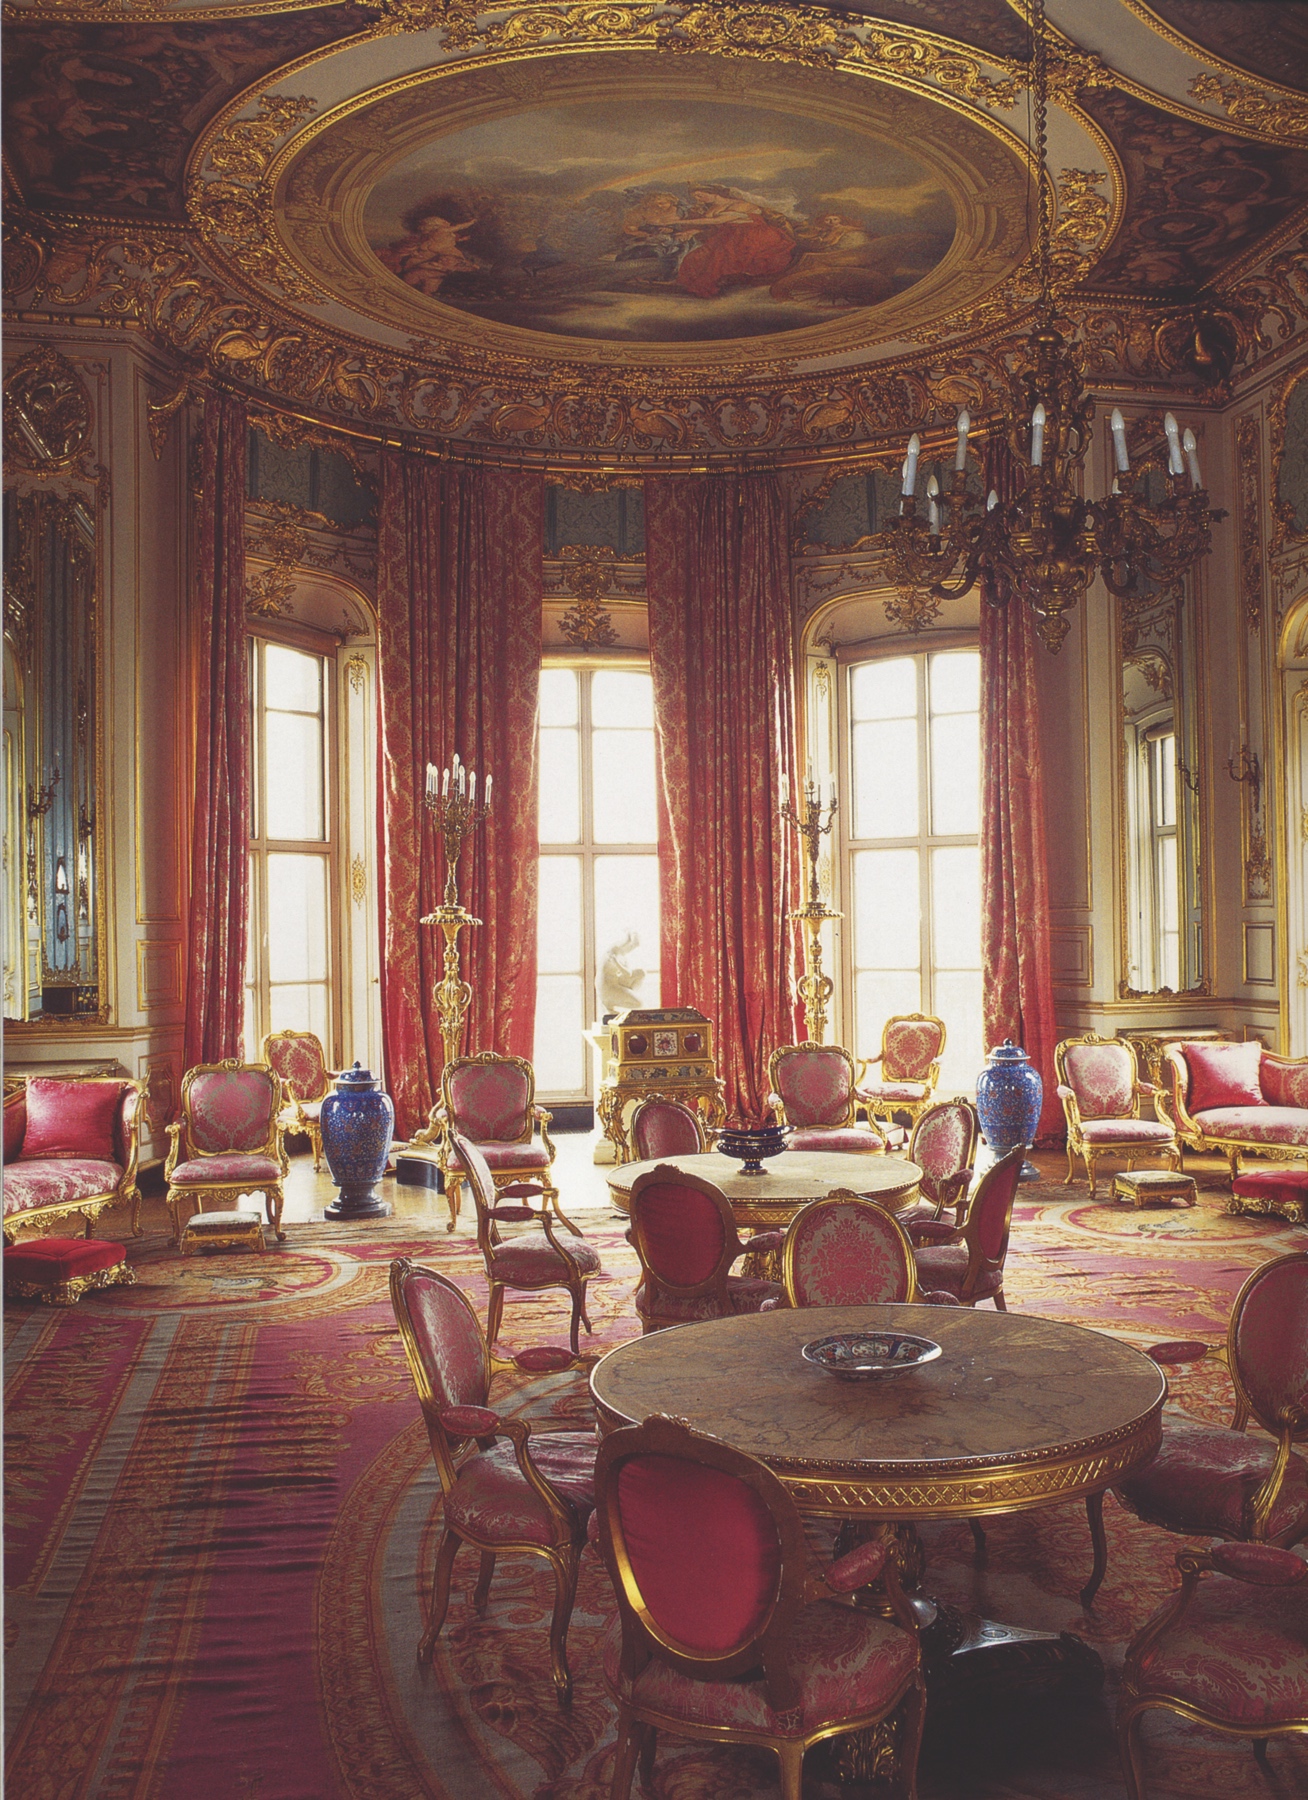 The Dining Room at Belvoir Castle